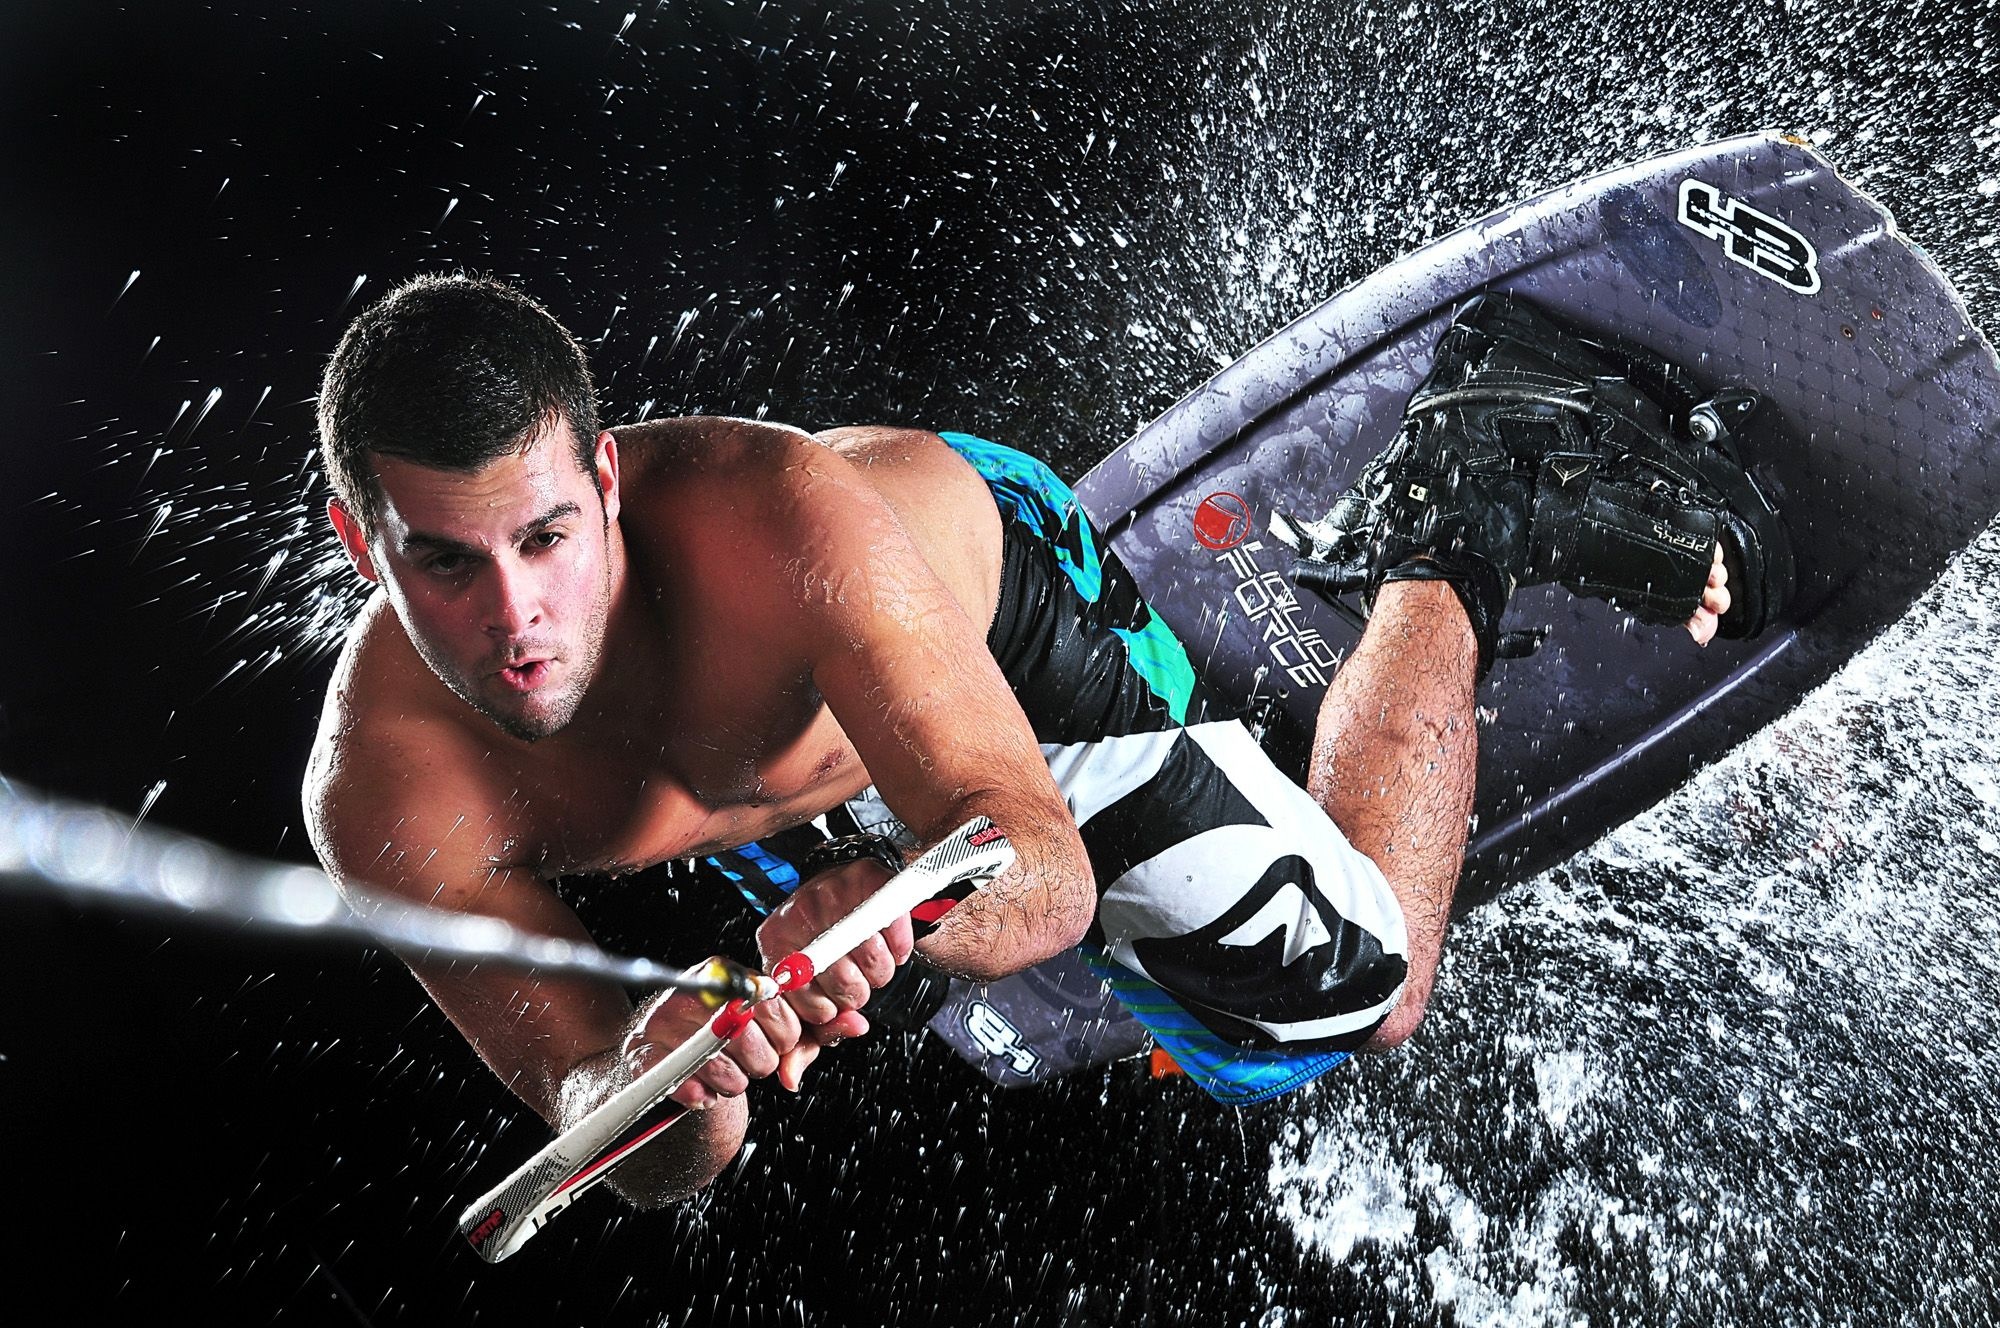 Wakeboarding: Professional surfer and wakeboarder, Extreme sports, Performance water sports. 2000x1330 HD Wallpaper.